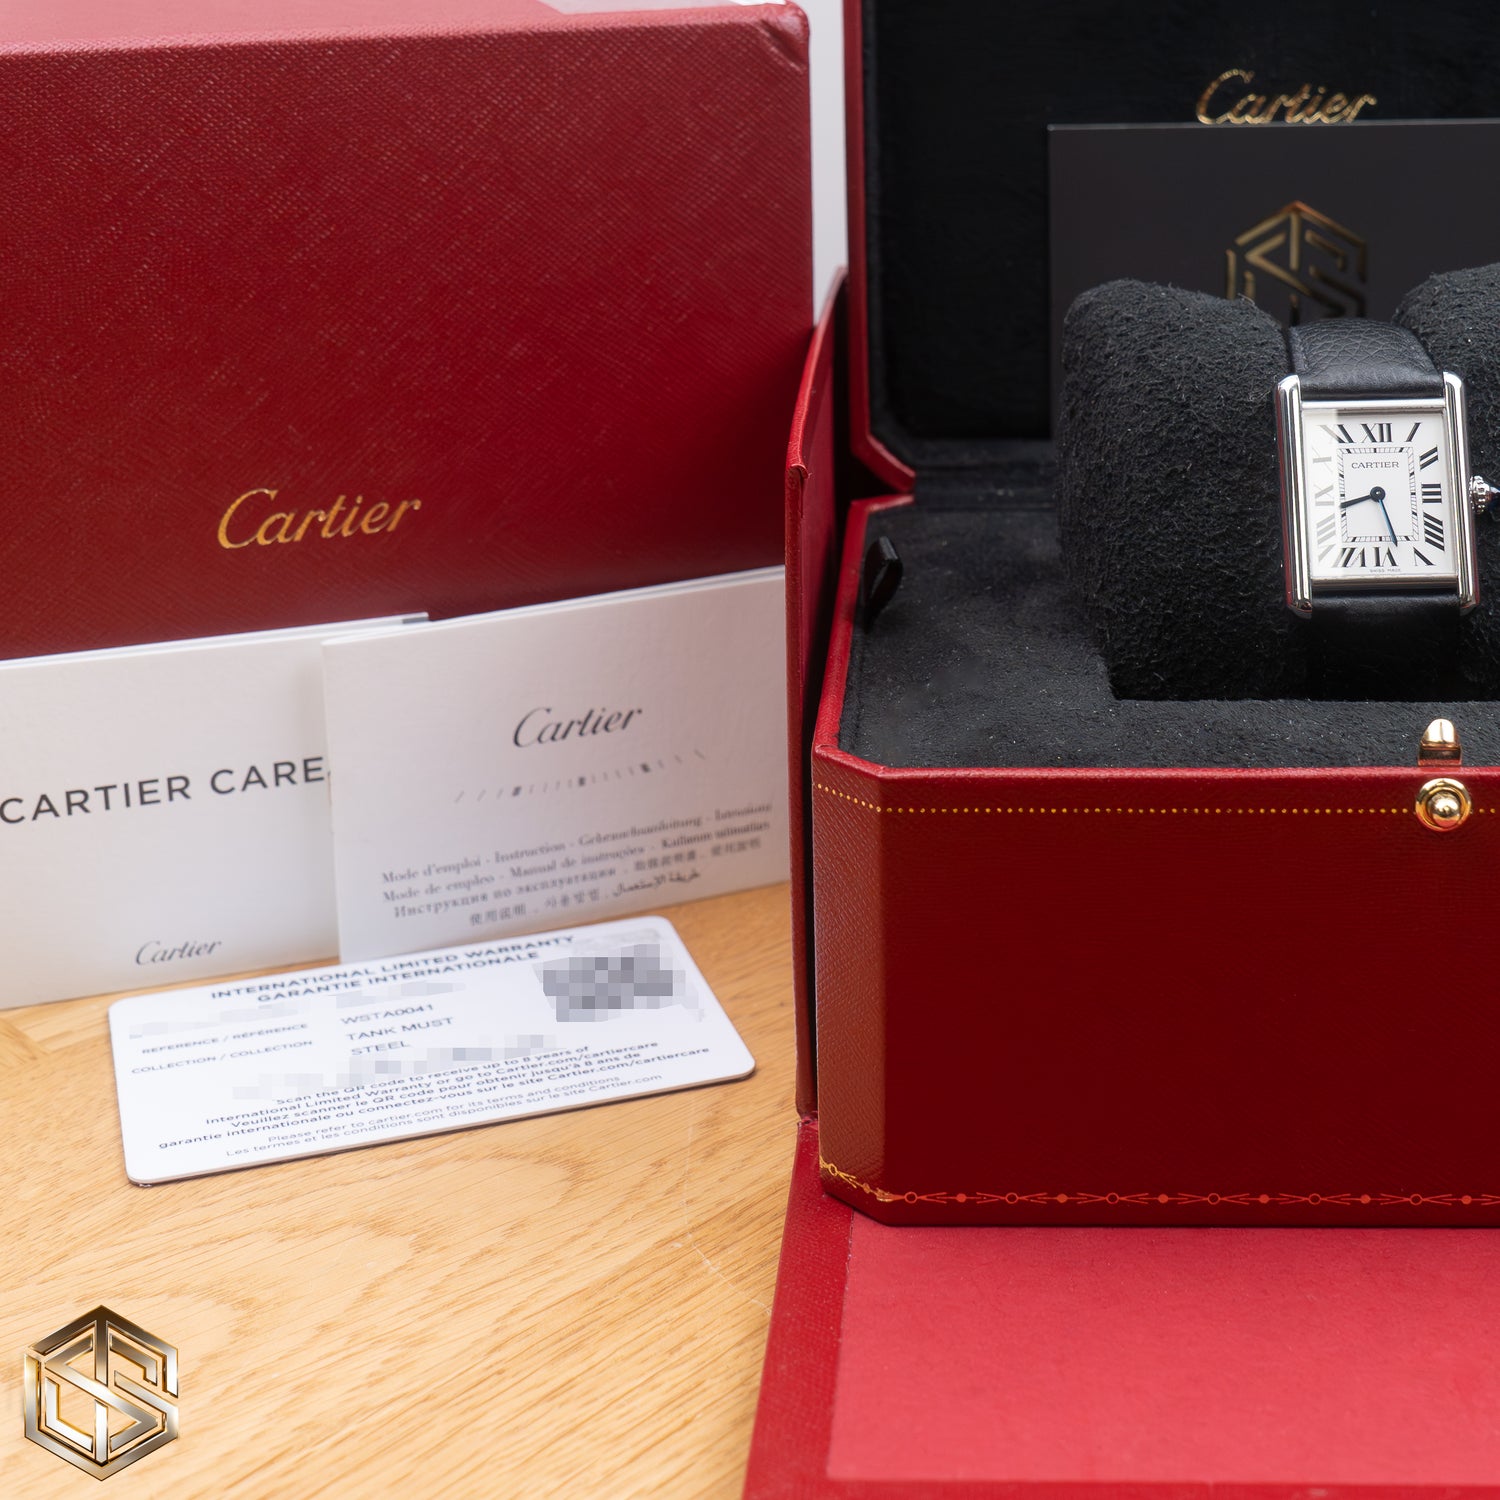 Cartier WSTA0041 Tank Must Large Model Leather Strap 25.5mm 2021 Watch